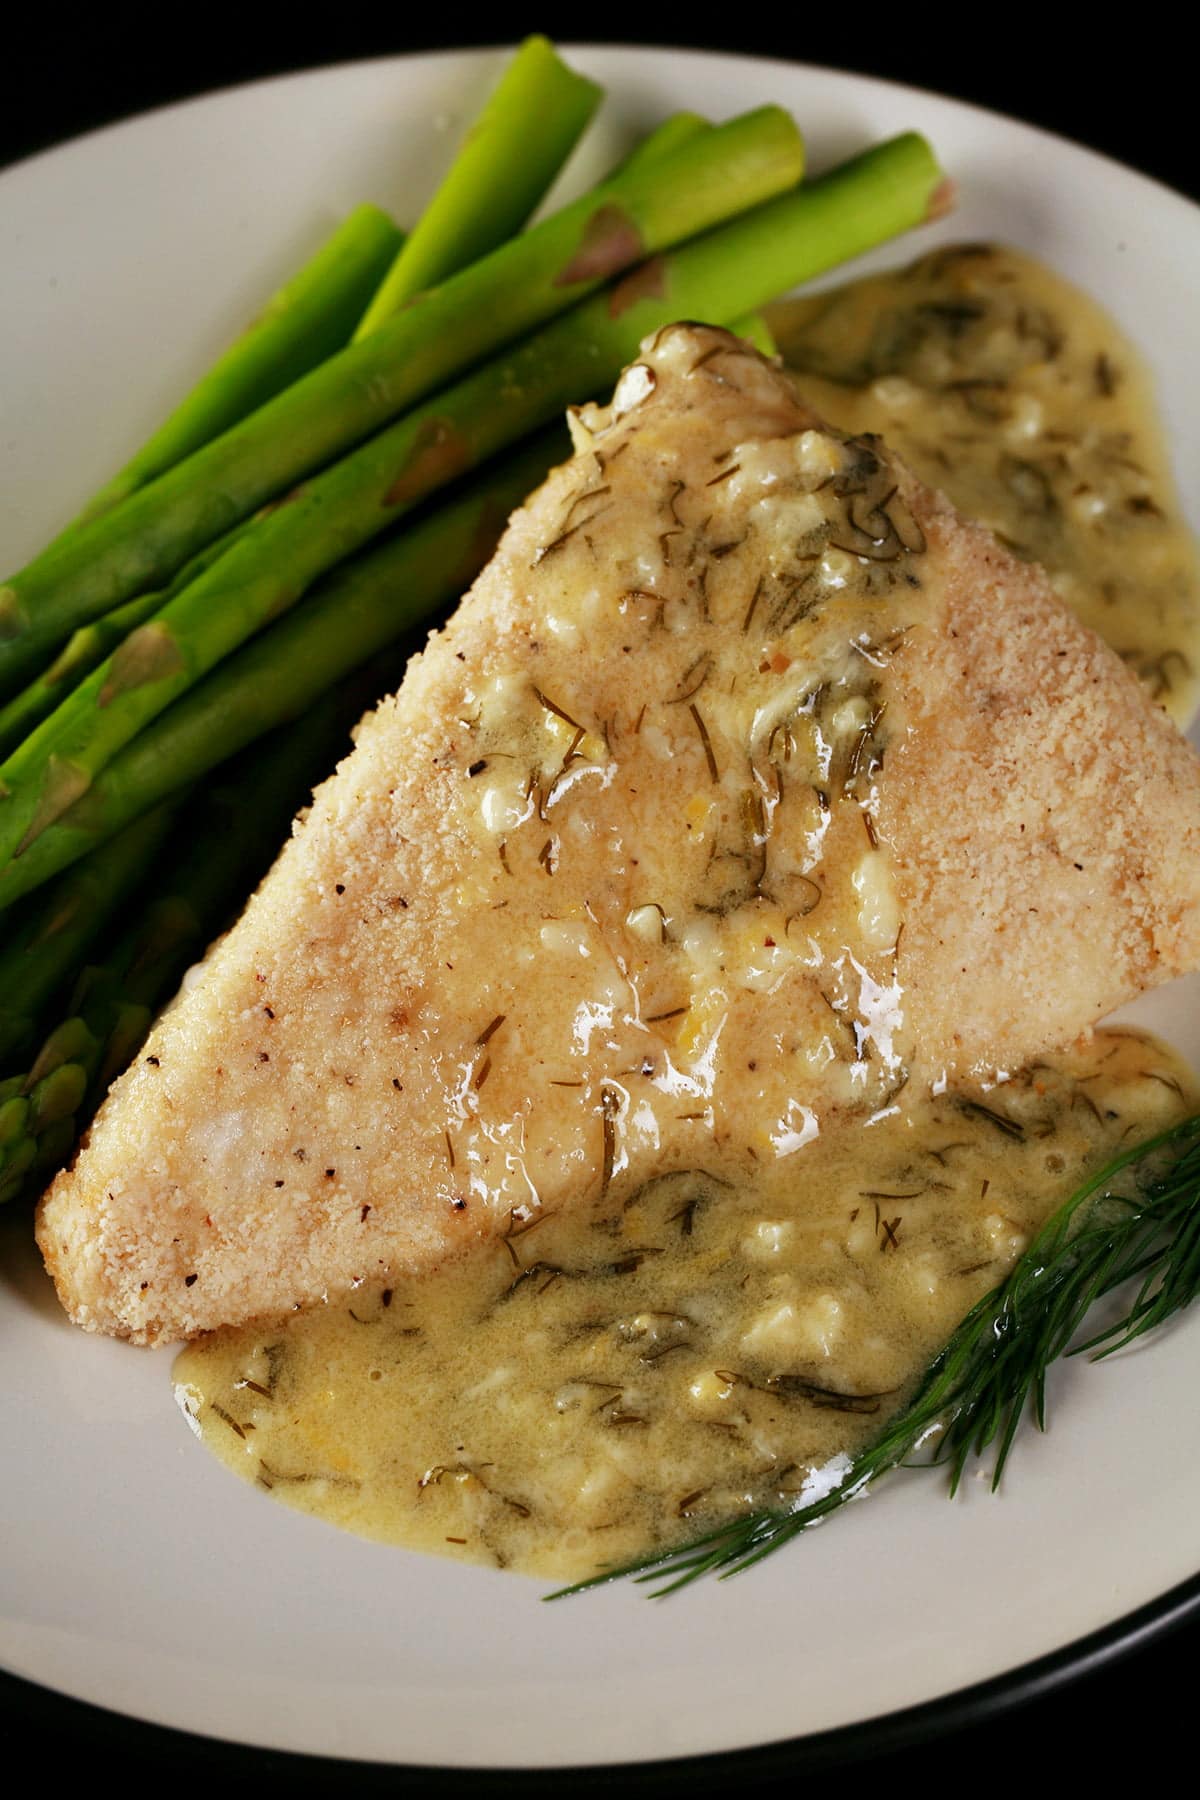 A large piece of almond crusted halibut is on a white plate. A yellow cream sauce with flecks of green - lemon dill cream sauce - has been poured over the fish, and there are asparagus spears on the side.